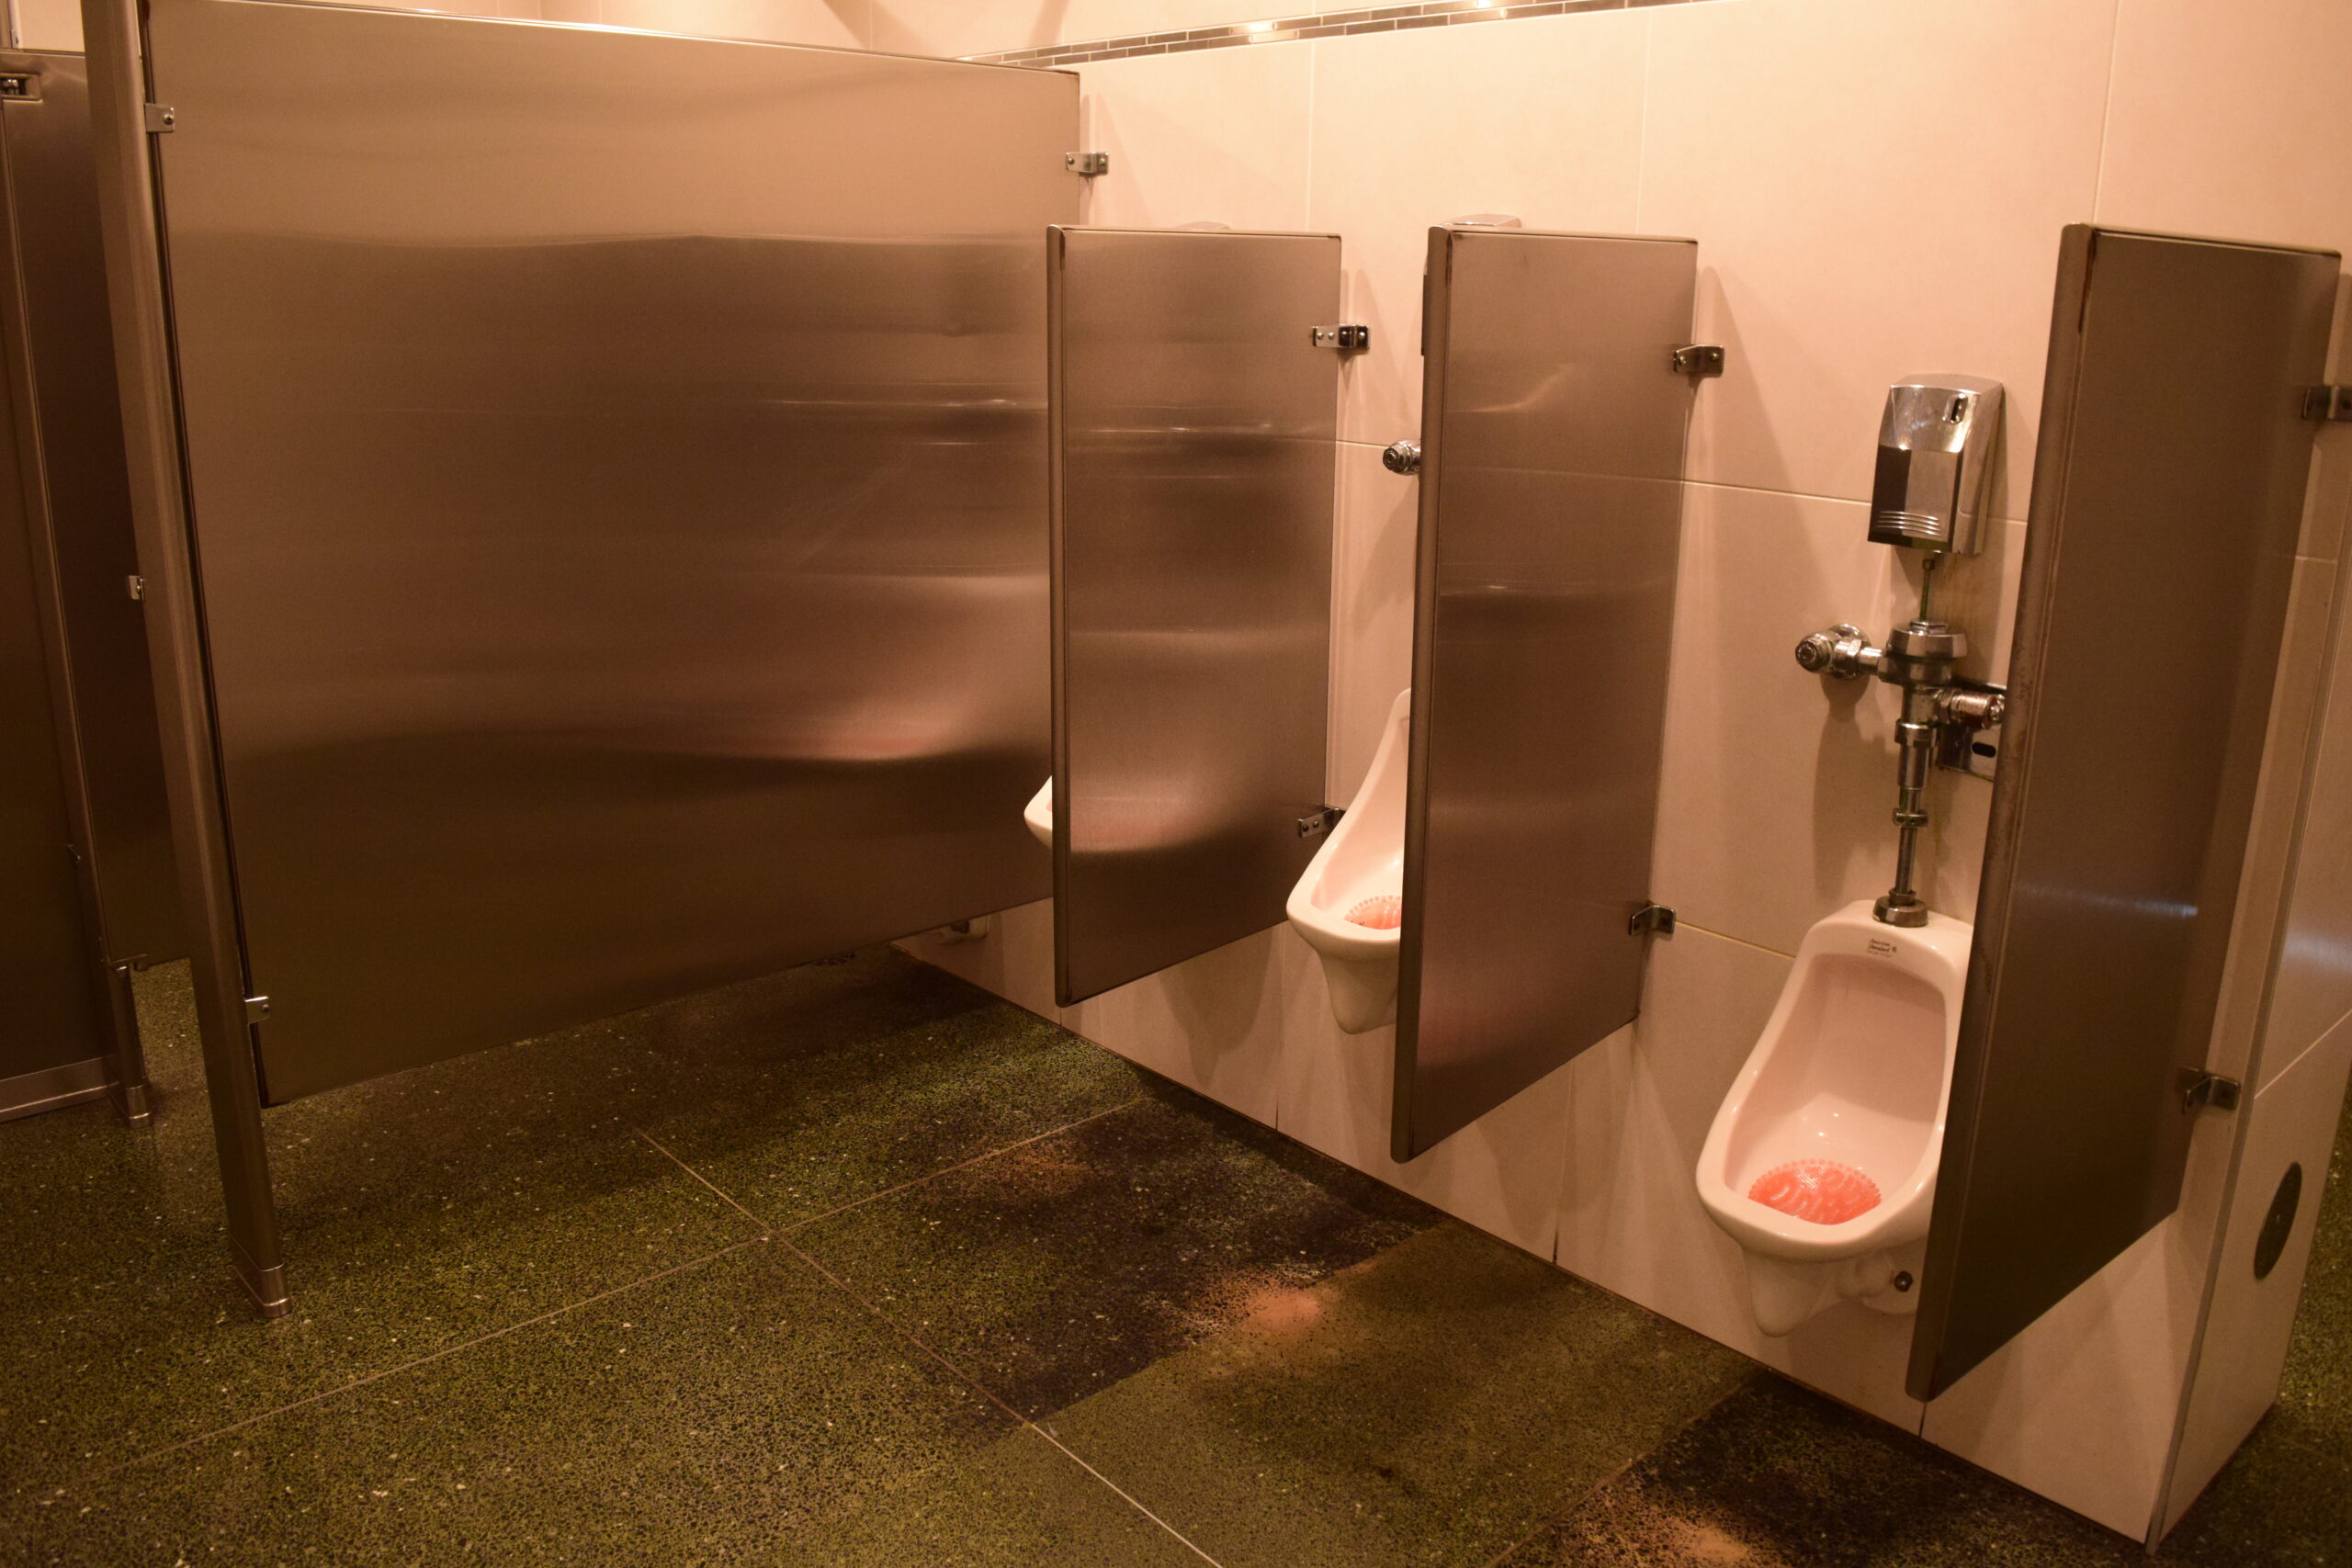 A set of three urinals separated by metal dividers. The urinal on the right is lower to the ground.